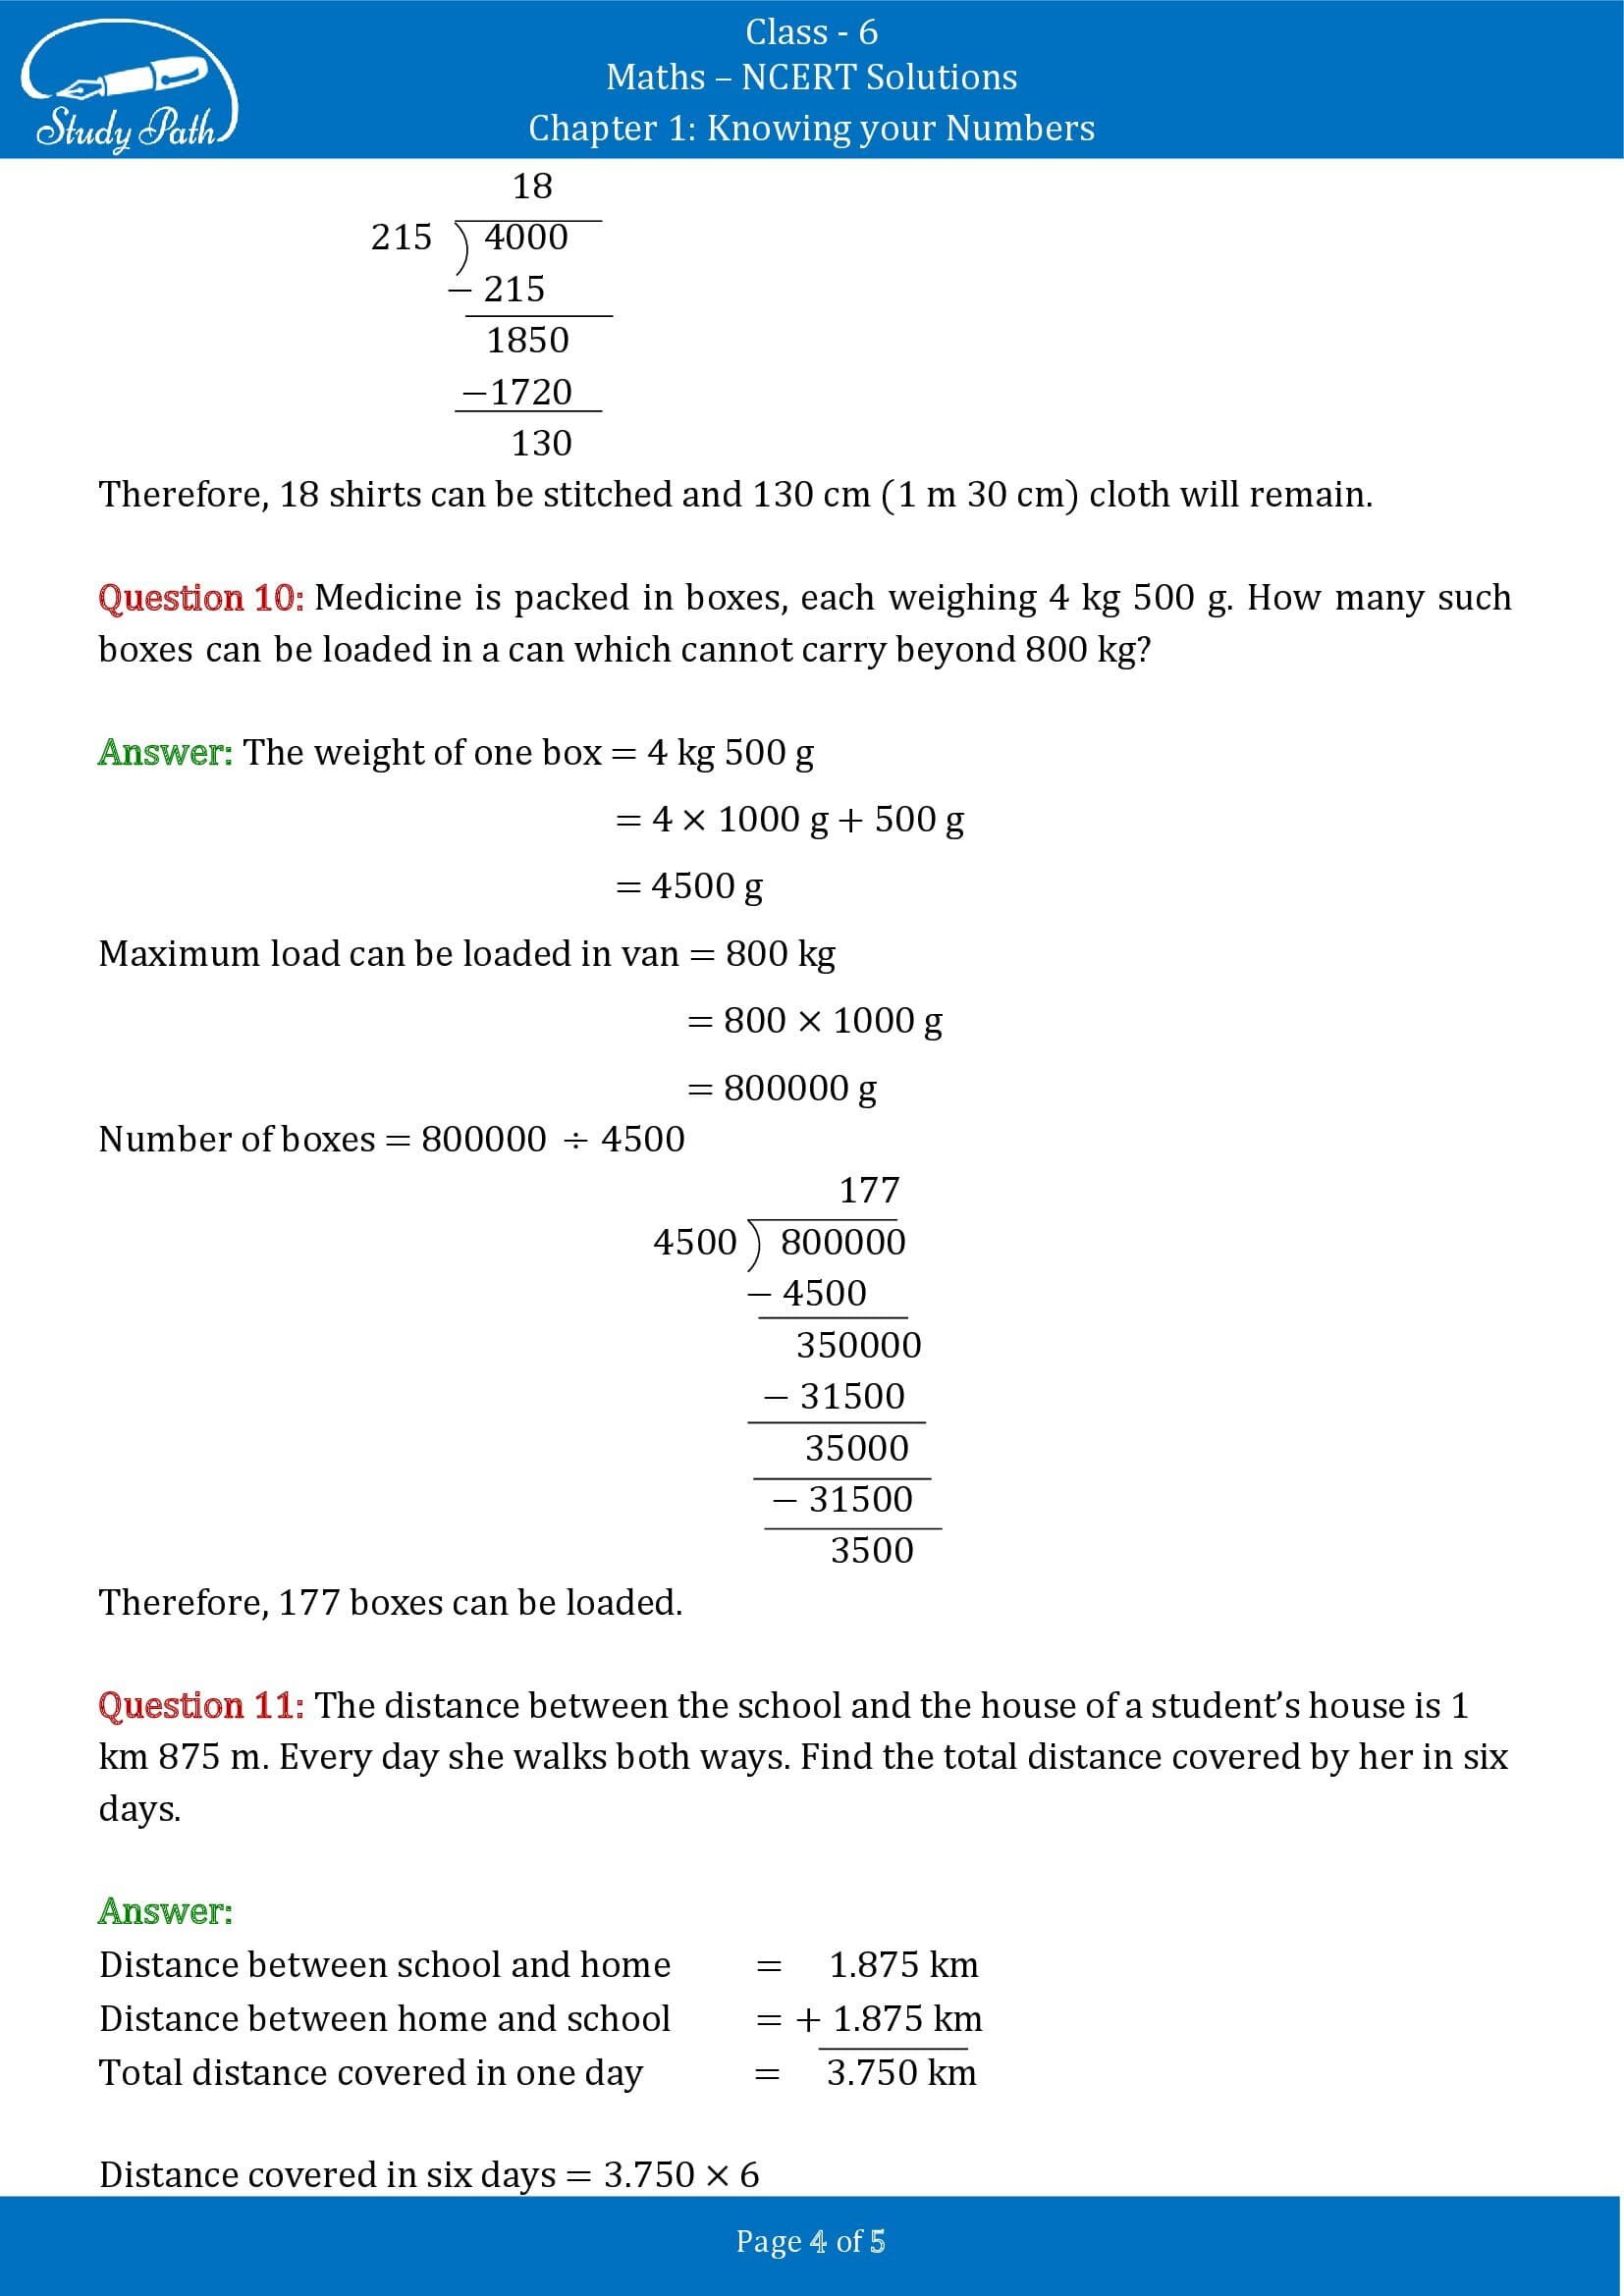 NCERT Solutions for Class 6 Maths Chapter 1 Knowing Your Numbers Exercise 1.2 00004